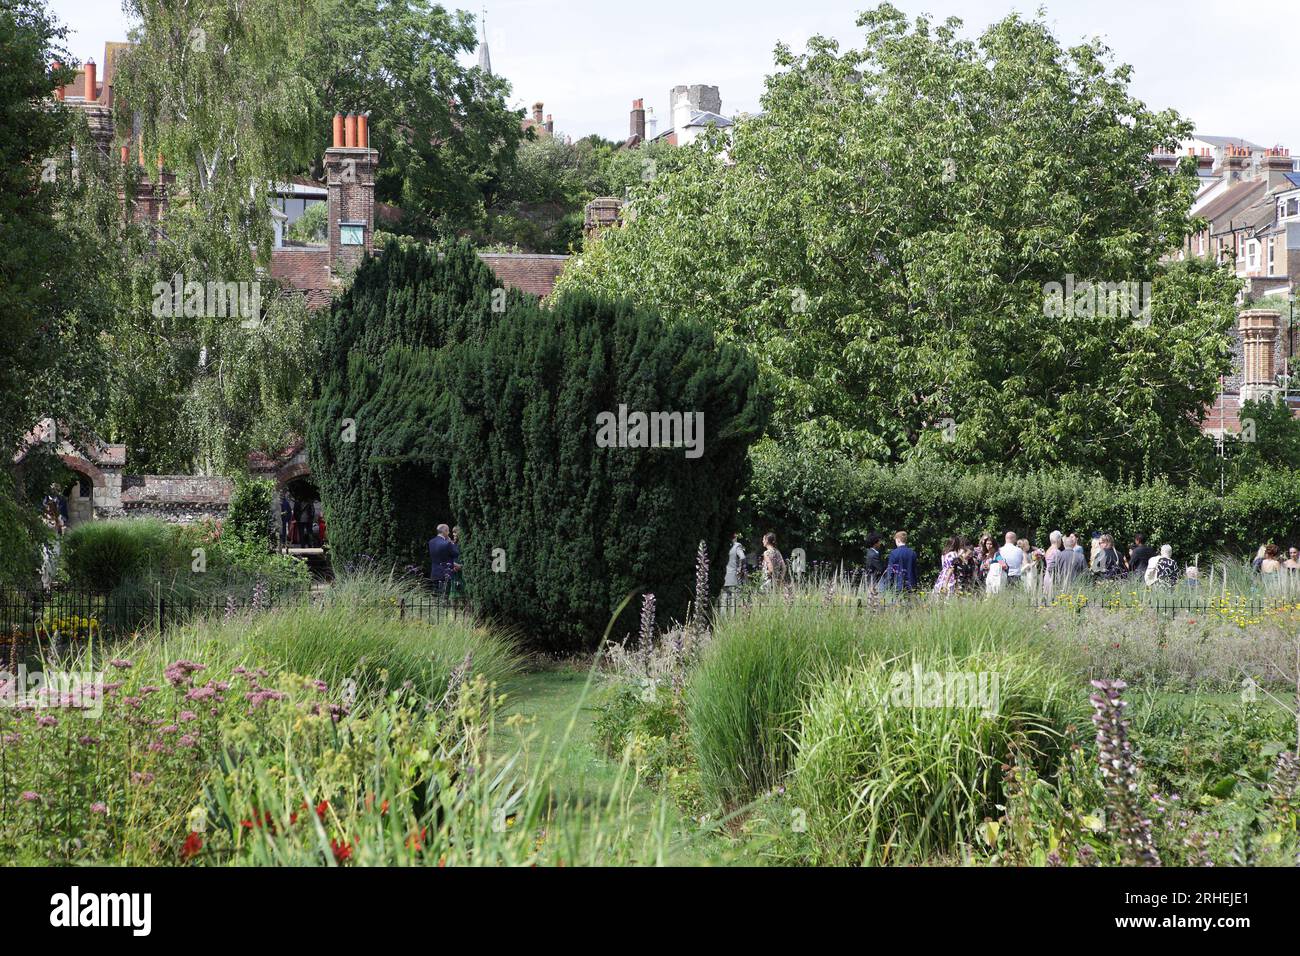 A wedding party congregates in Southover Grange Gardens having first visited the Register Office as seen behind the yew trees. Stock Photo